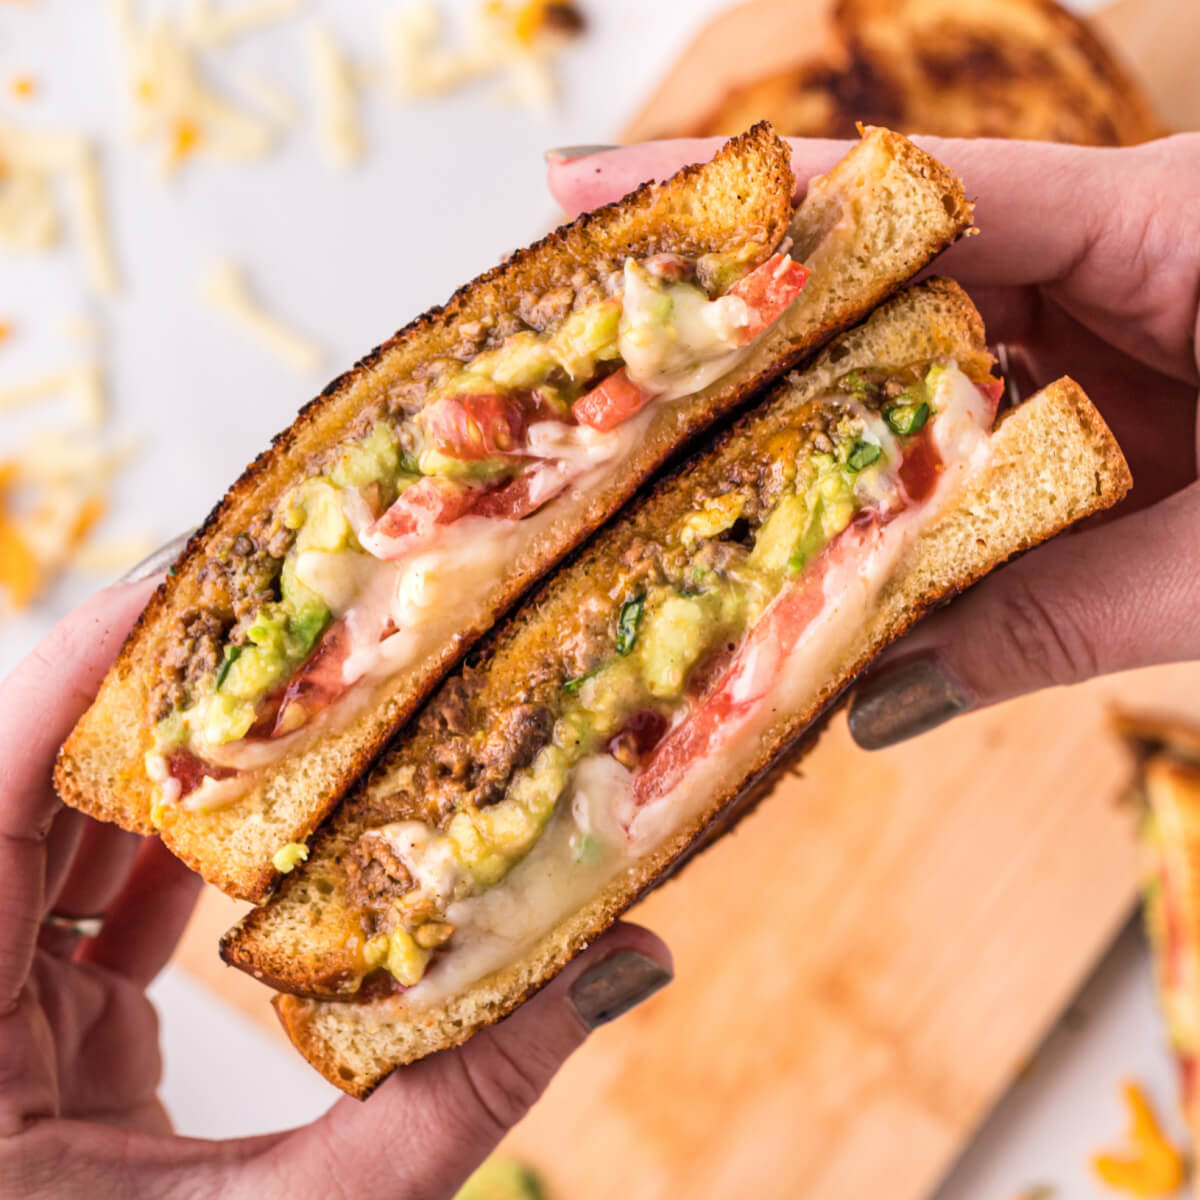 https://www.lovebakesgoodcakes.com/wp-content/uploads/2020/04/Taco-Stuffed-Grilled-Cheese-square.jpg